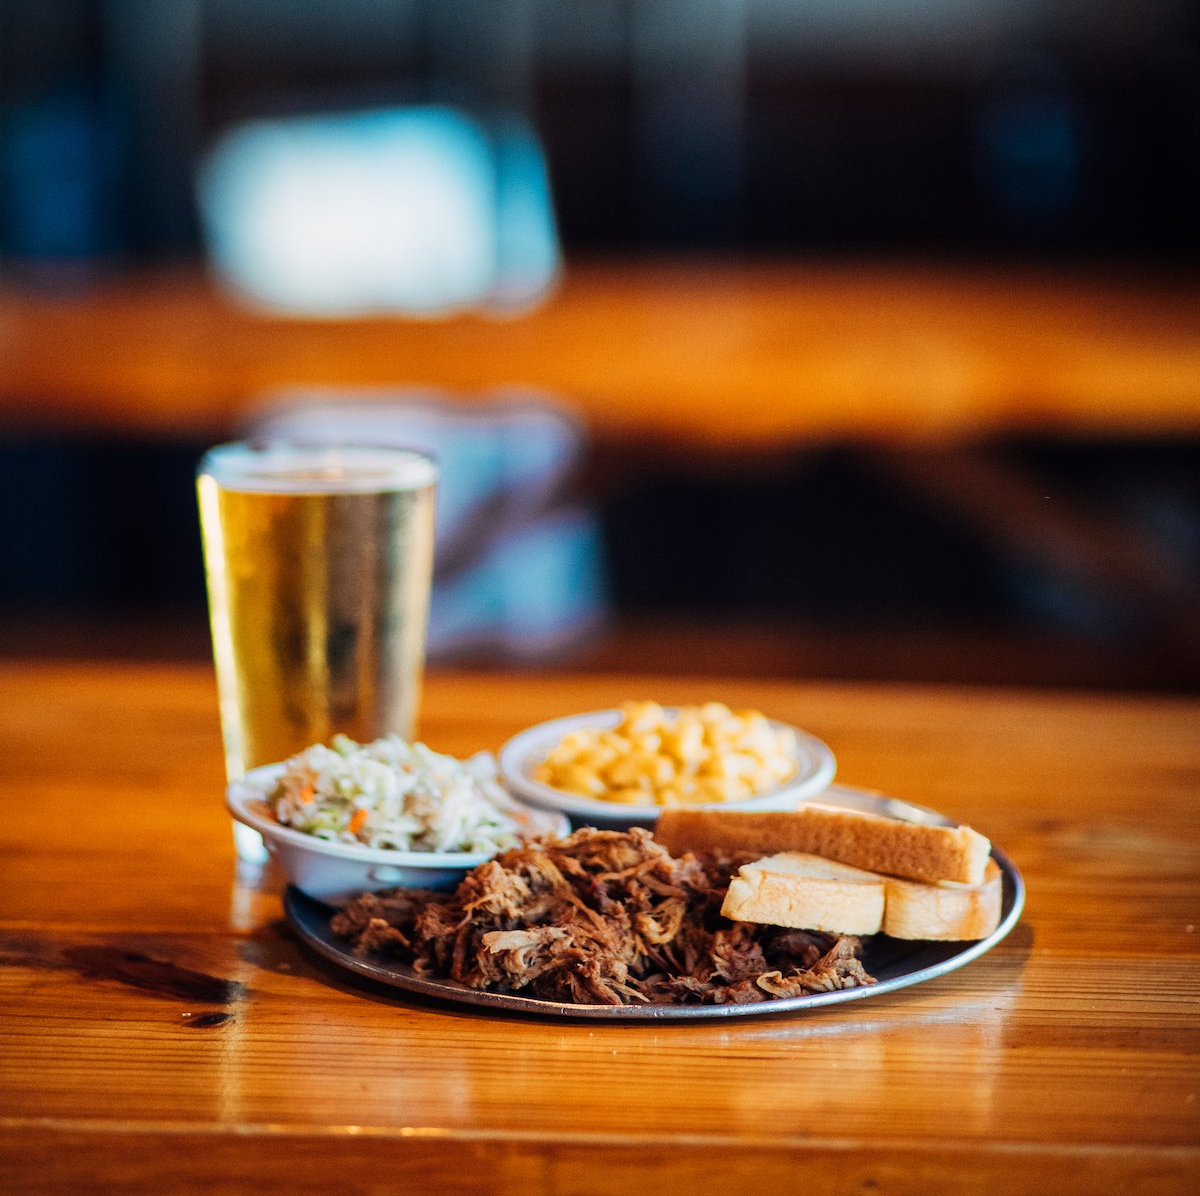 Try a Delicious Plate of Barbecue With Southern Sides and a Cold Beer at Como Smoke & Fire.